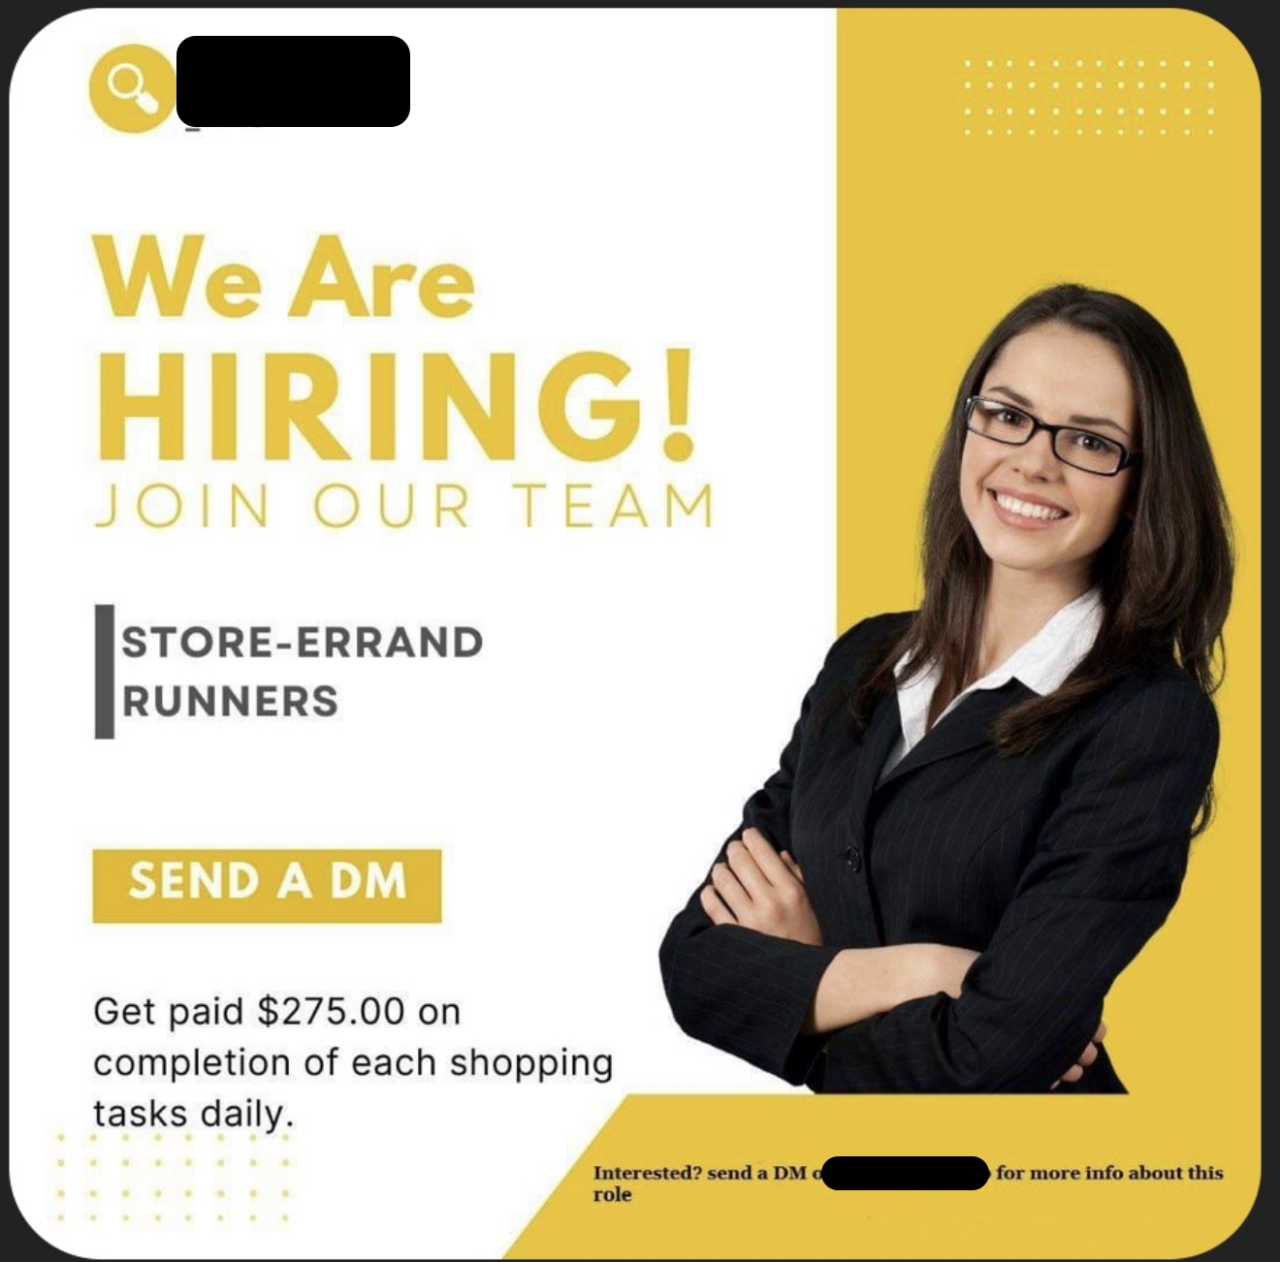 An example of a fake job ad